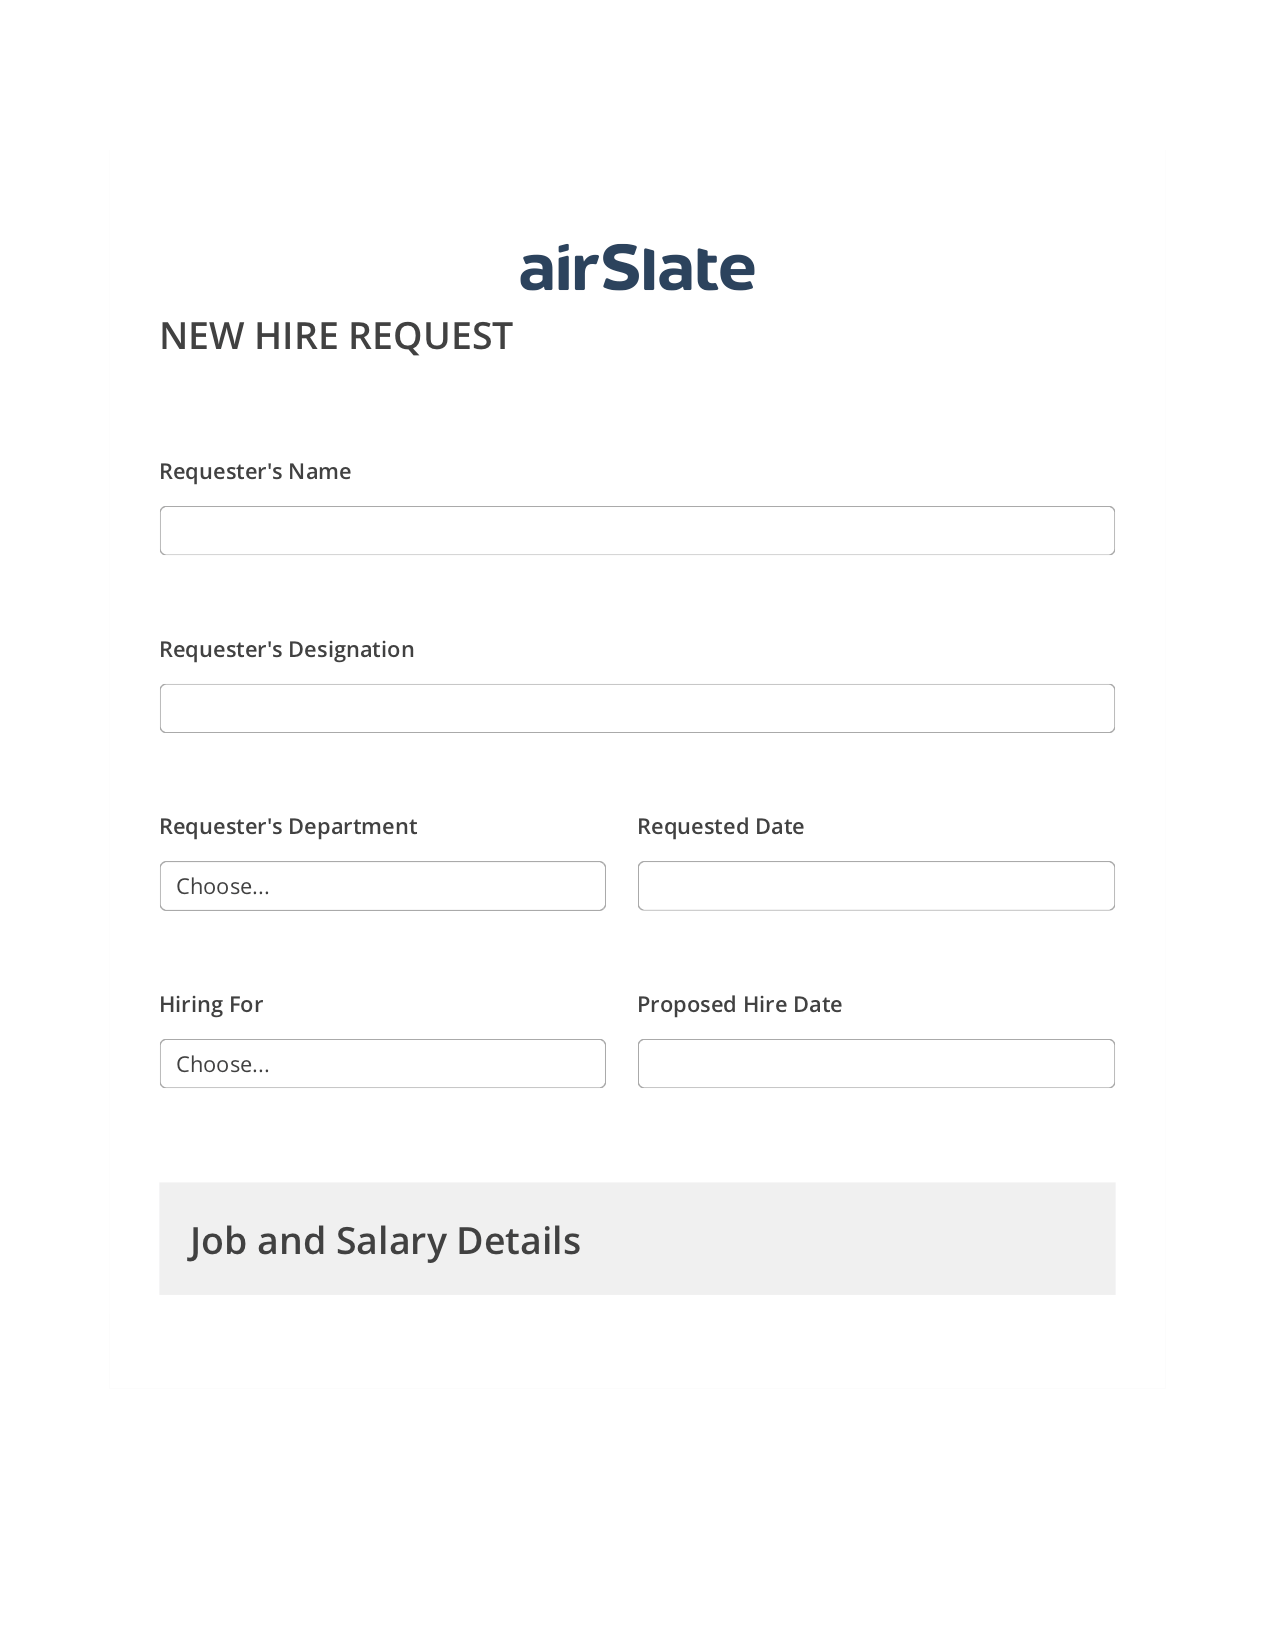 Hiring Request Workflow Pre-fill from Smartsheet Bot, Export to MS Dynamics 365 Bot, Archive to SharePoint Folder Bot